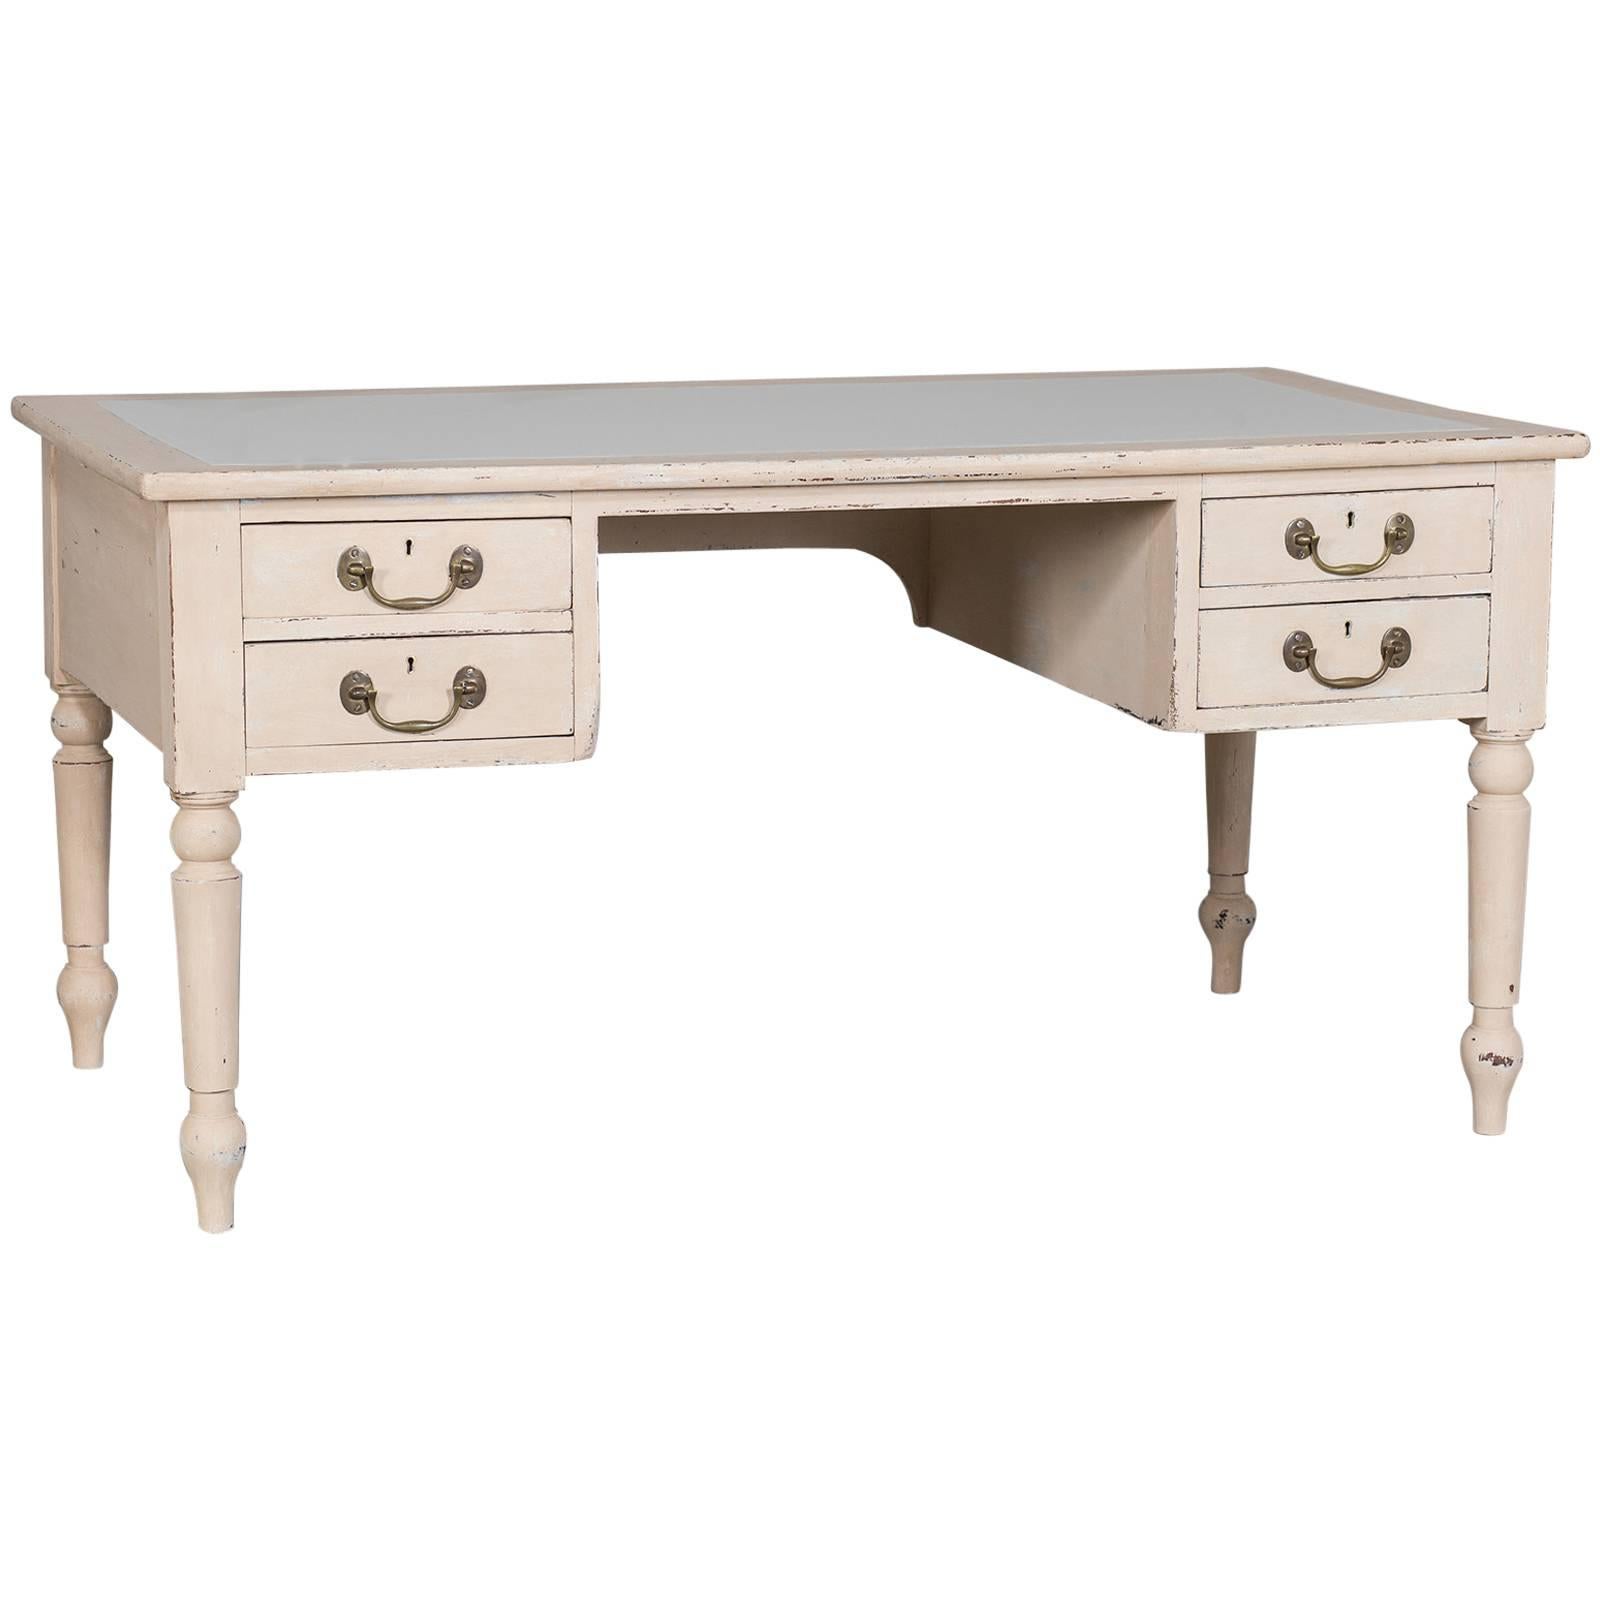 Antique English Painted Writing Table Desk, circa 1880